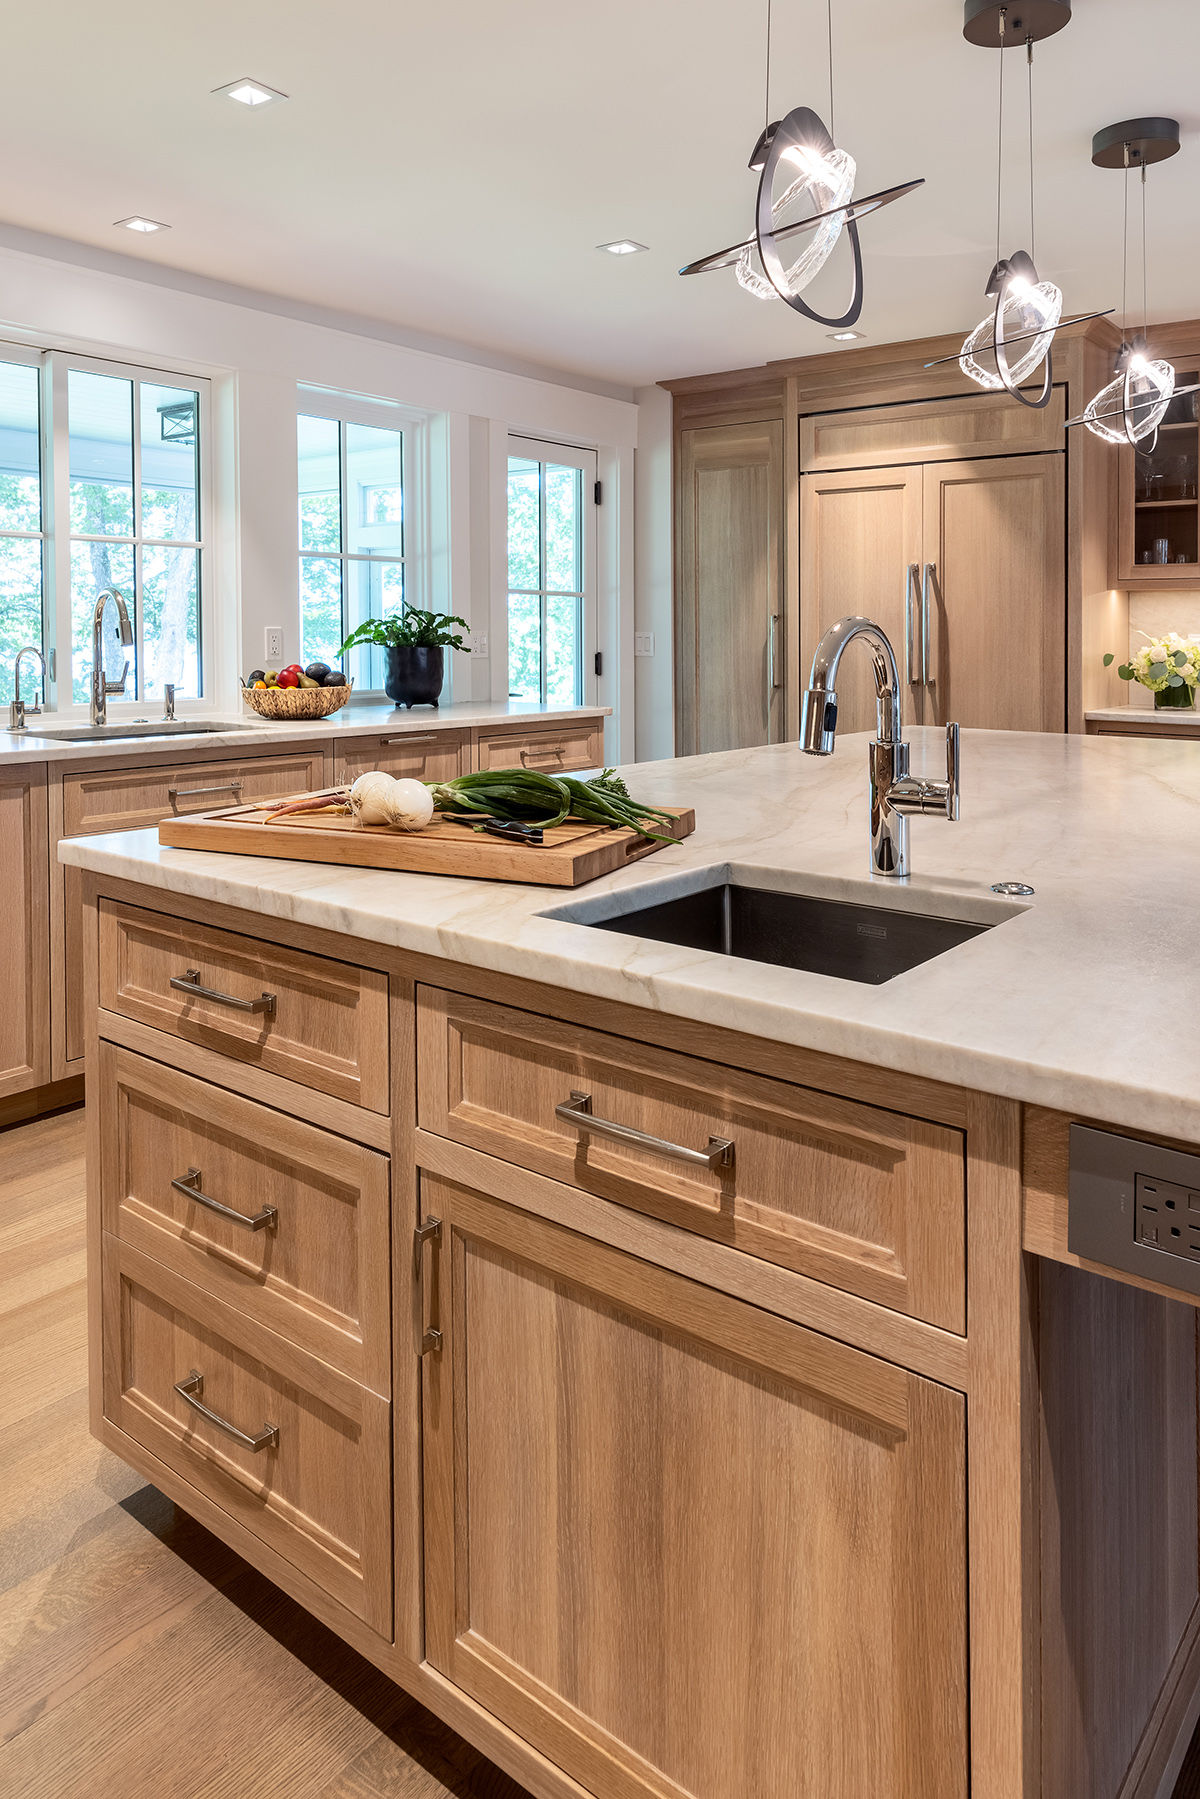 Island Sink and Cabinetry